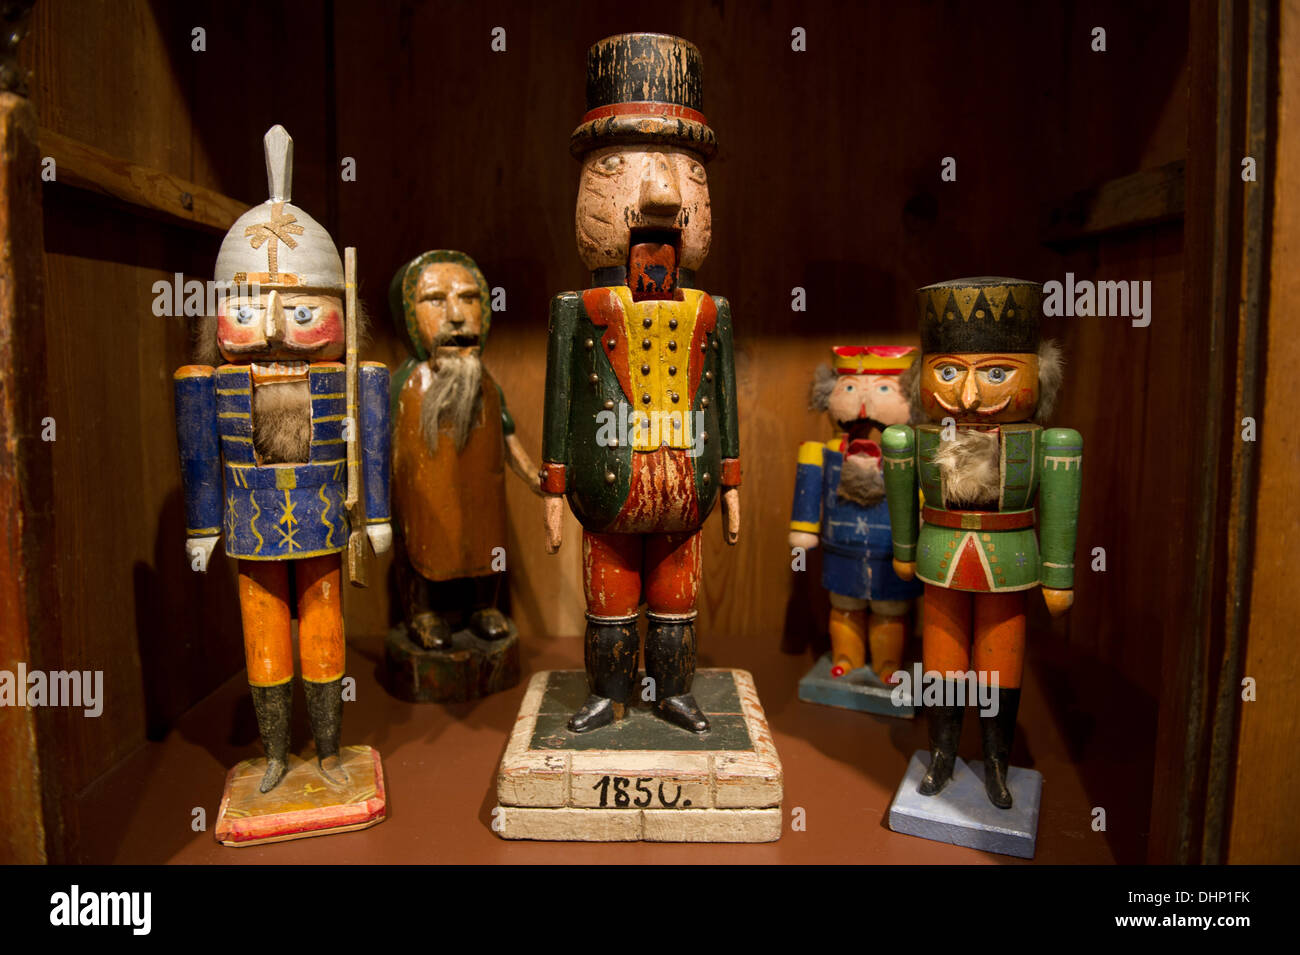 Stralsund, Germany. 12th Nov, 2013. Wooden nutcracker from the Erz Mountains stand in the special exhibition of nutcrackers of collector Adolf Heidenreich in Stralsund, Germany, 12 November 2013. From 15 November 2013, the Kulturhistorisches Museum of Stralsund exhibits the most beautiful pieces of his collection of about 150 nutcrackers. Photo: Stefan Sauer/dpa/Alamy Live News Stock Photo